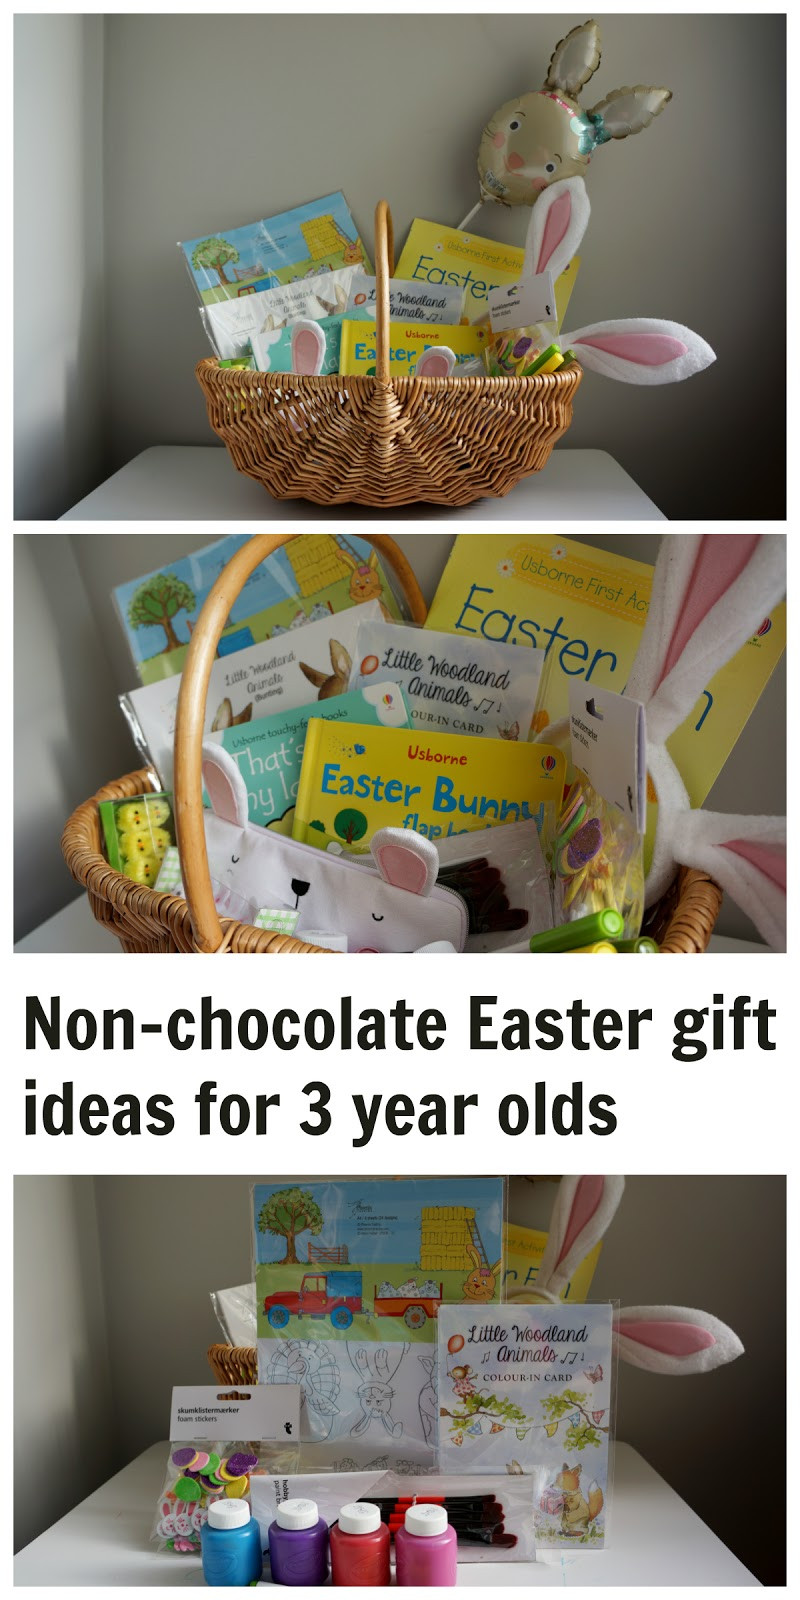 Easter Gifts For 3 Year Old
 What to put in a non chocolate Easter basket for a three